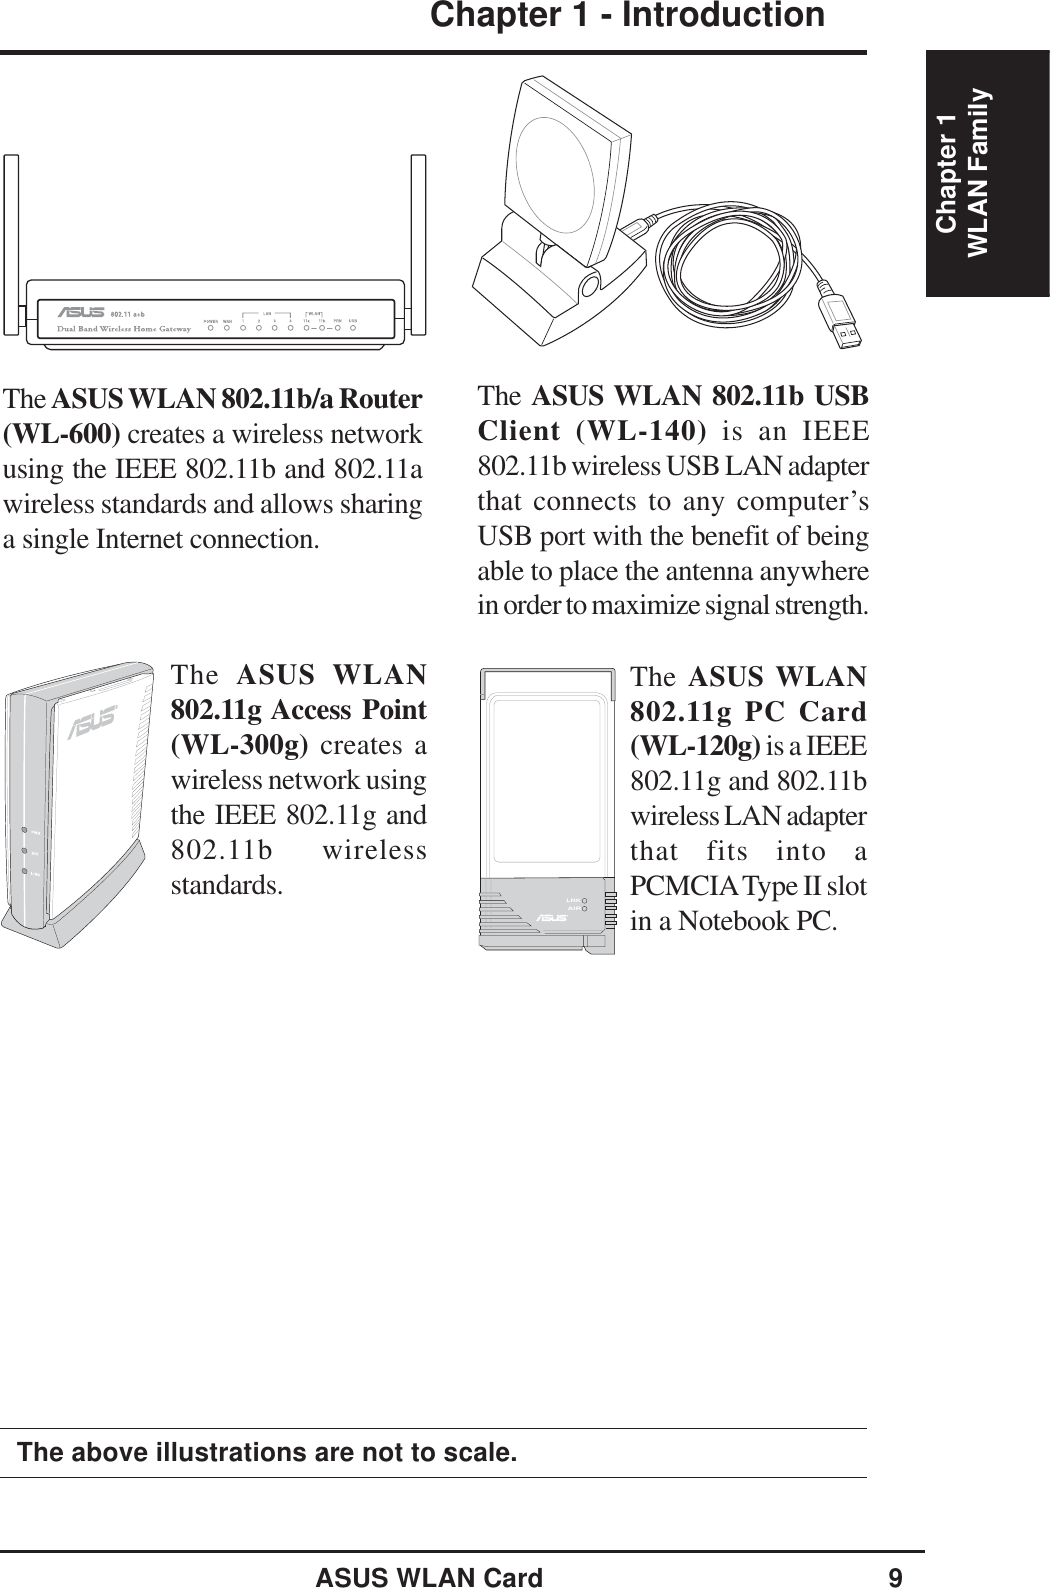 ASUS WLAN Card 9Chapter 1 - IntroductionChapter 1The ASUS WLAN 802.11b/a Router(WL-600) creates a wireless networkusing the IEEE 802.11b and 802.11awireless standards and allows sharinga single Internet connection.The ASUS WLAN 802.11b USBClient (WL-140) is an IEEE802.11b wireless USB LAN adapterthat connects to any computer’sUSB port with the benefit of beingable to place the antenna anywherein order to maximize signal strength.The ASUS WLAN802.11g Access Point(WL-300g) creates awireless network usingthe IEEE 802.11g and802.11b wirelessstandards.The above illustrations are not to scale.LNKAIRThe ASUS WLAN802.11g PC Card(WL-120g) is a IEEE802.11g and 802.11bwireless LAN adapterthat fits into aPCMCIA Type II slotin a Notebook PC.WLAN Family